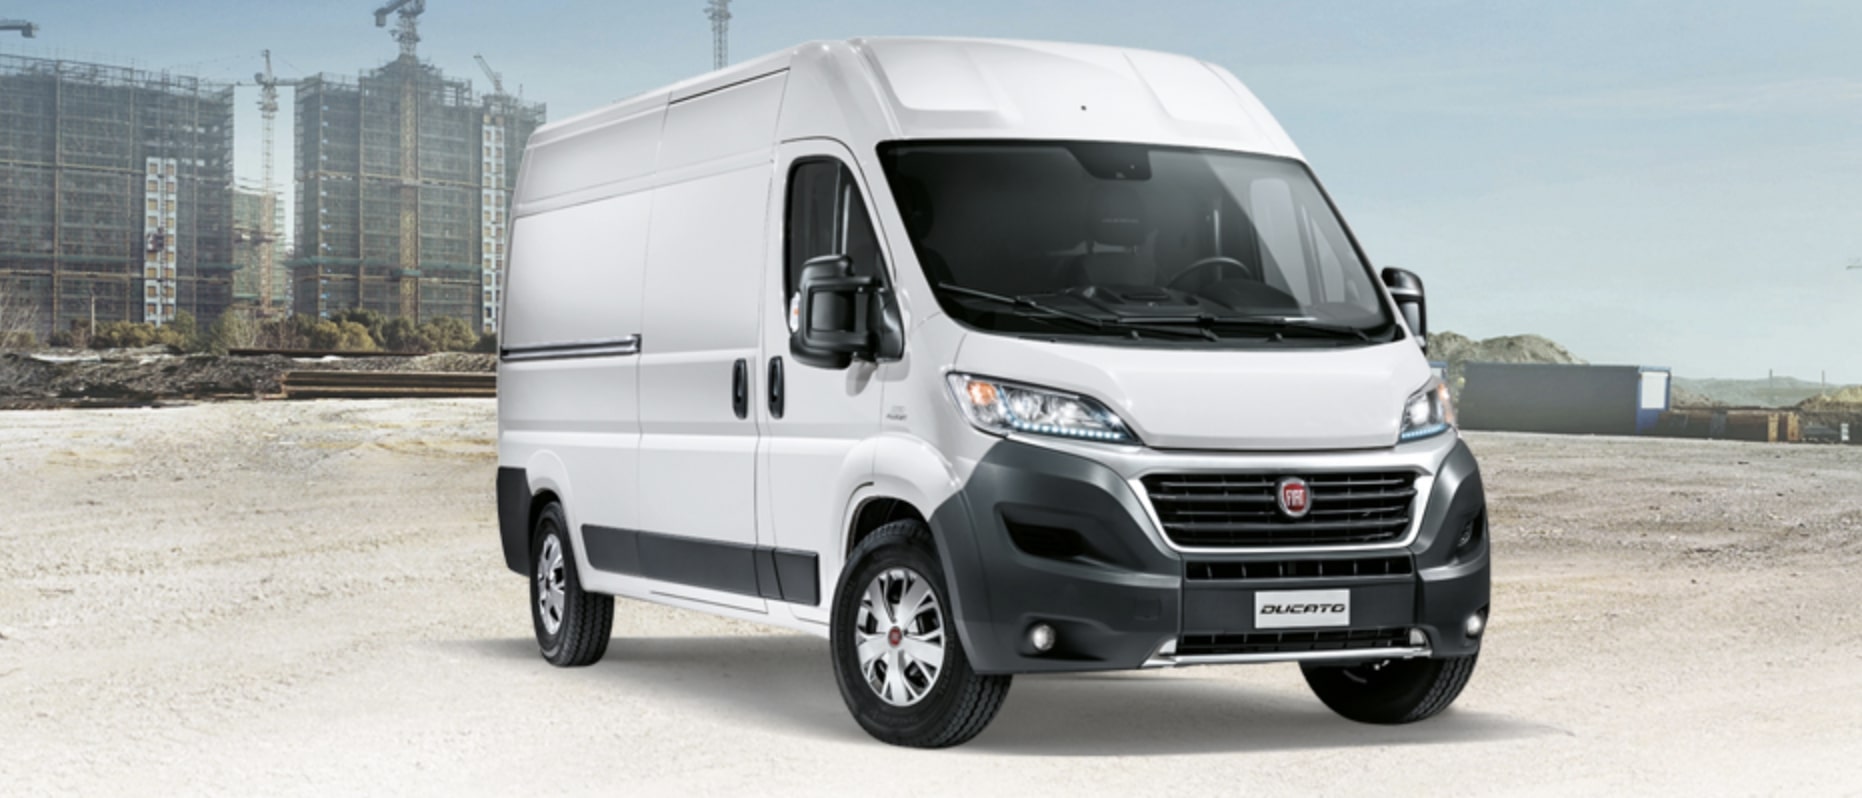 Ducato becomes the best-selling car in Europe